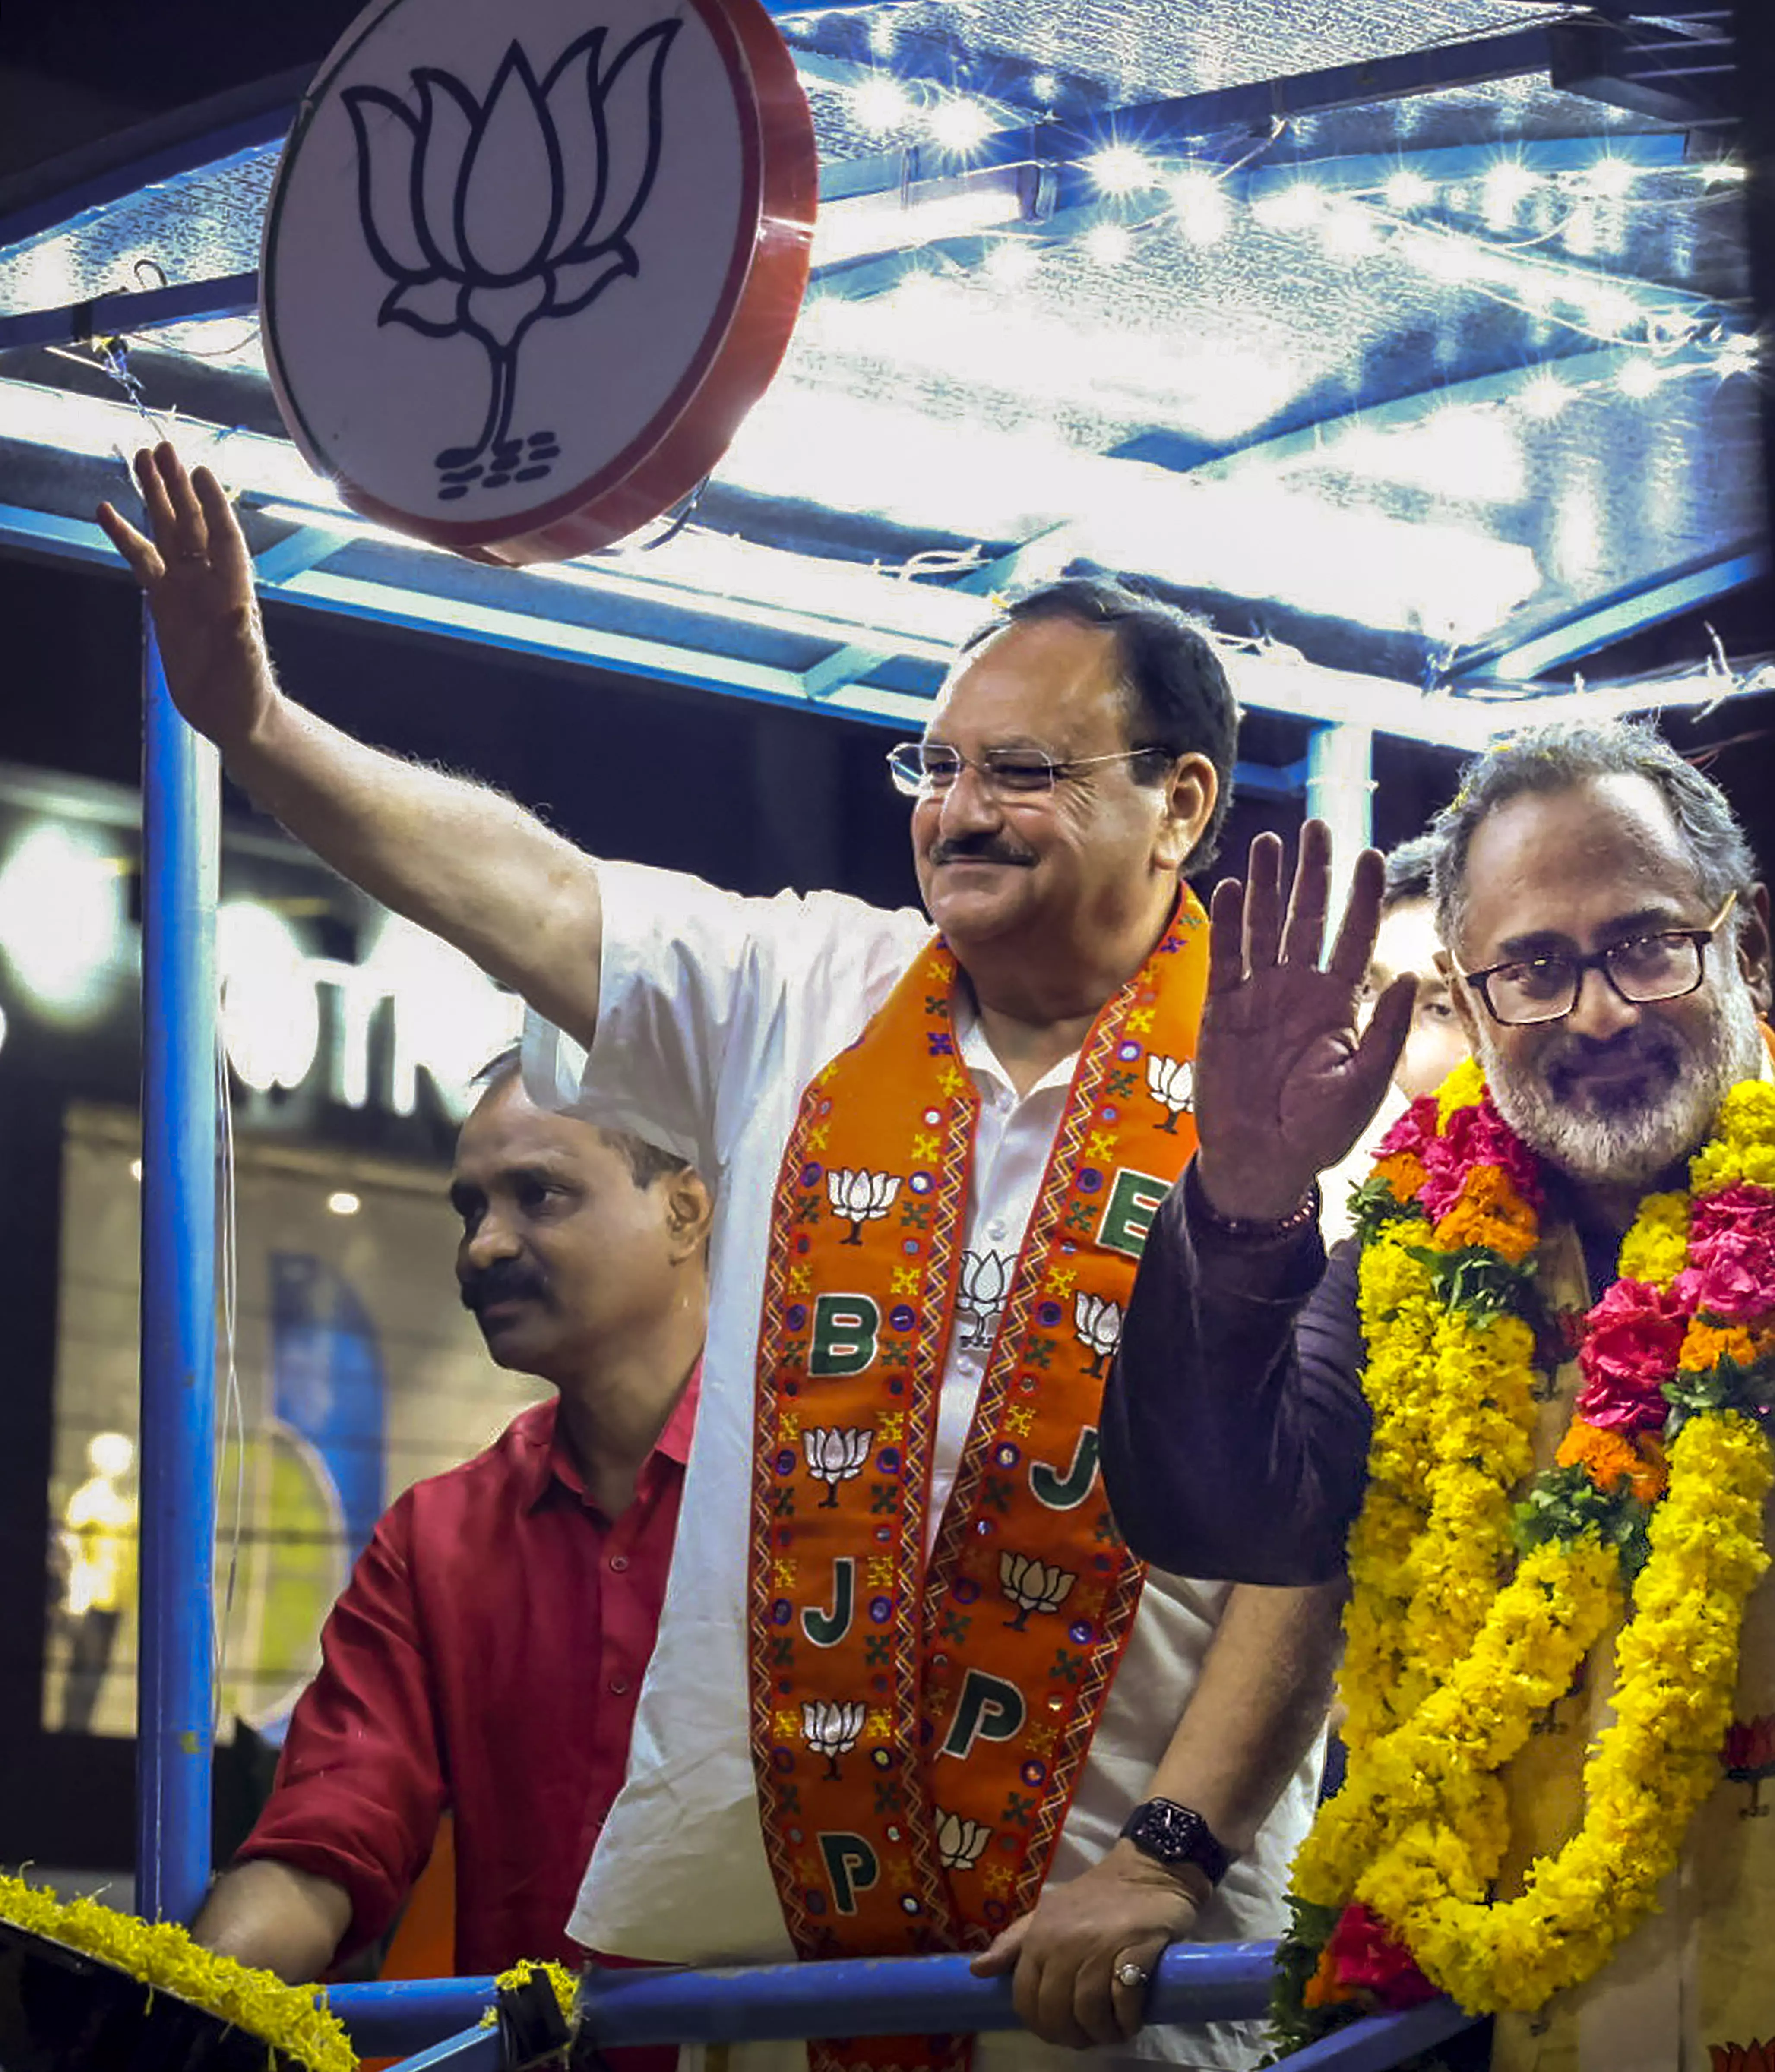 Leaders of INDIA bloc are either in jail or out on bail, claims BJP President J P Nadda